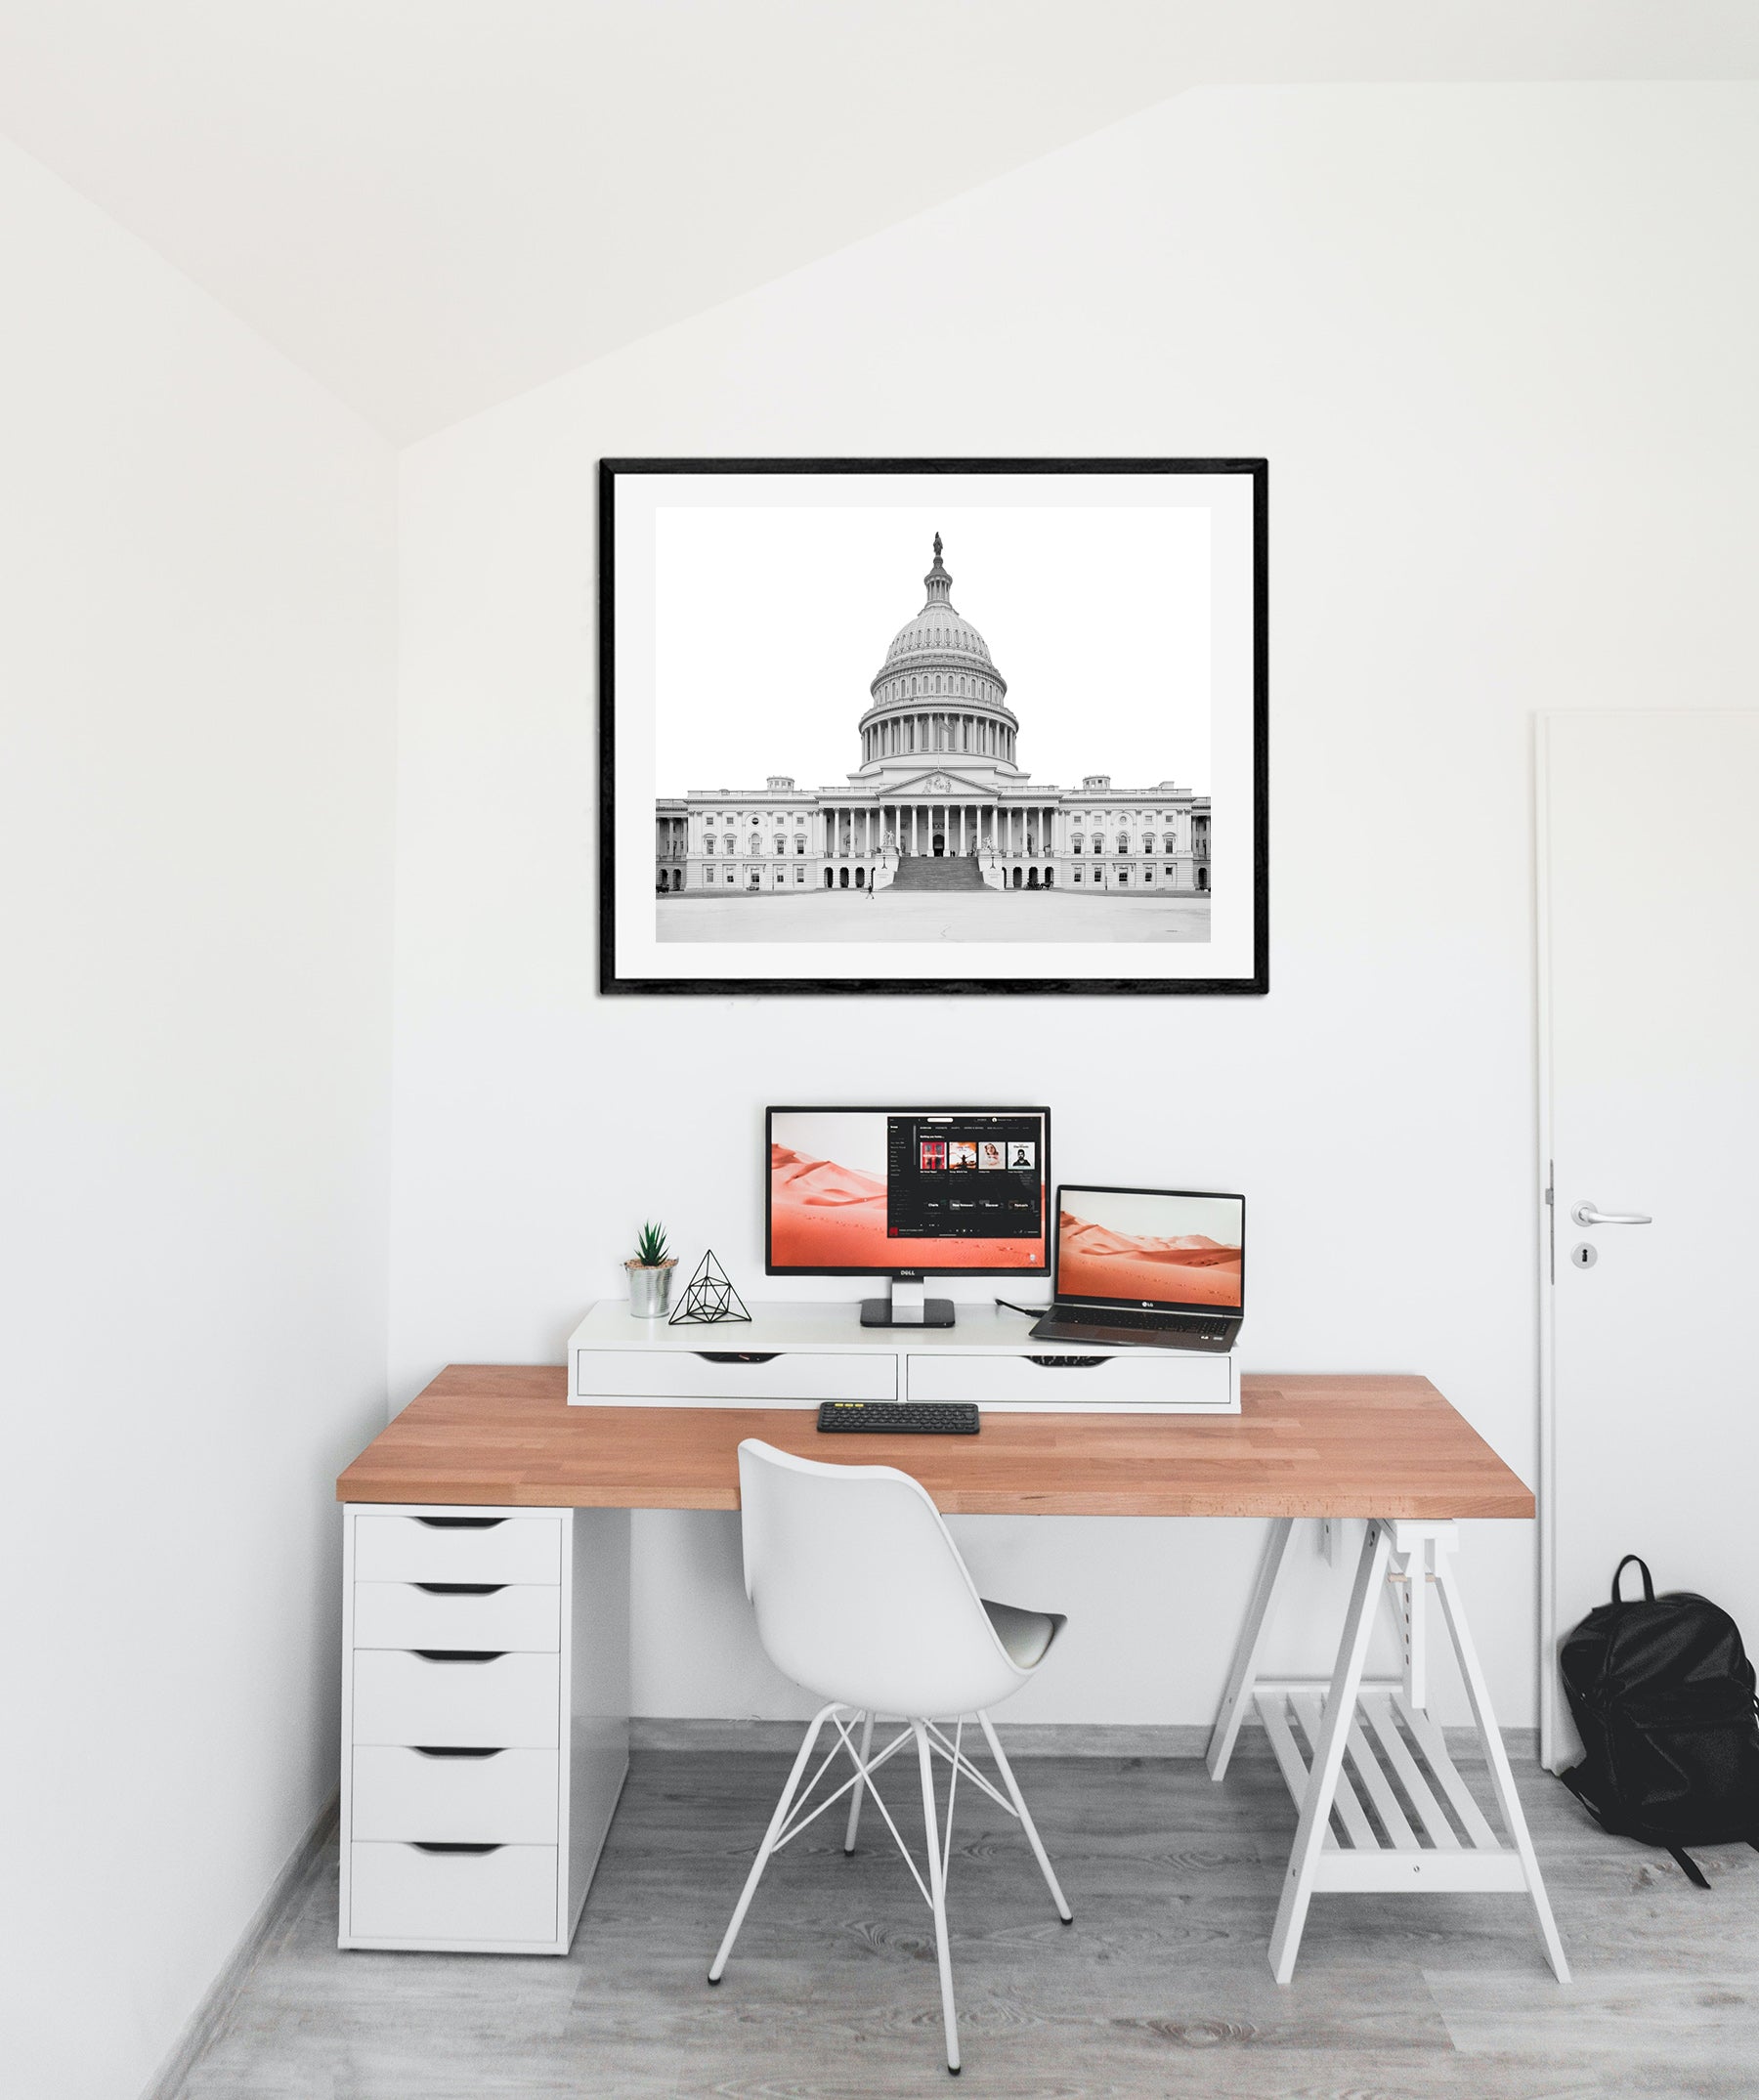 A framed paper print hanging in an office, featuring a black and white photo of the Capitol Building